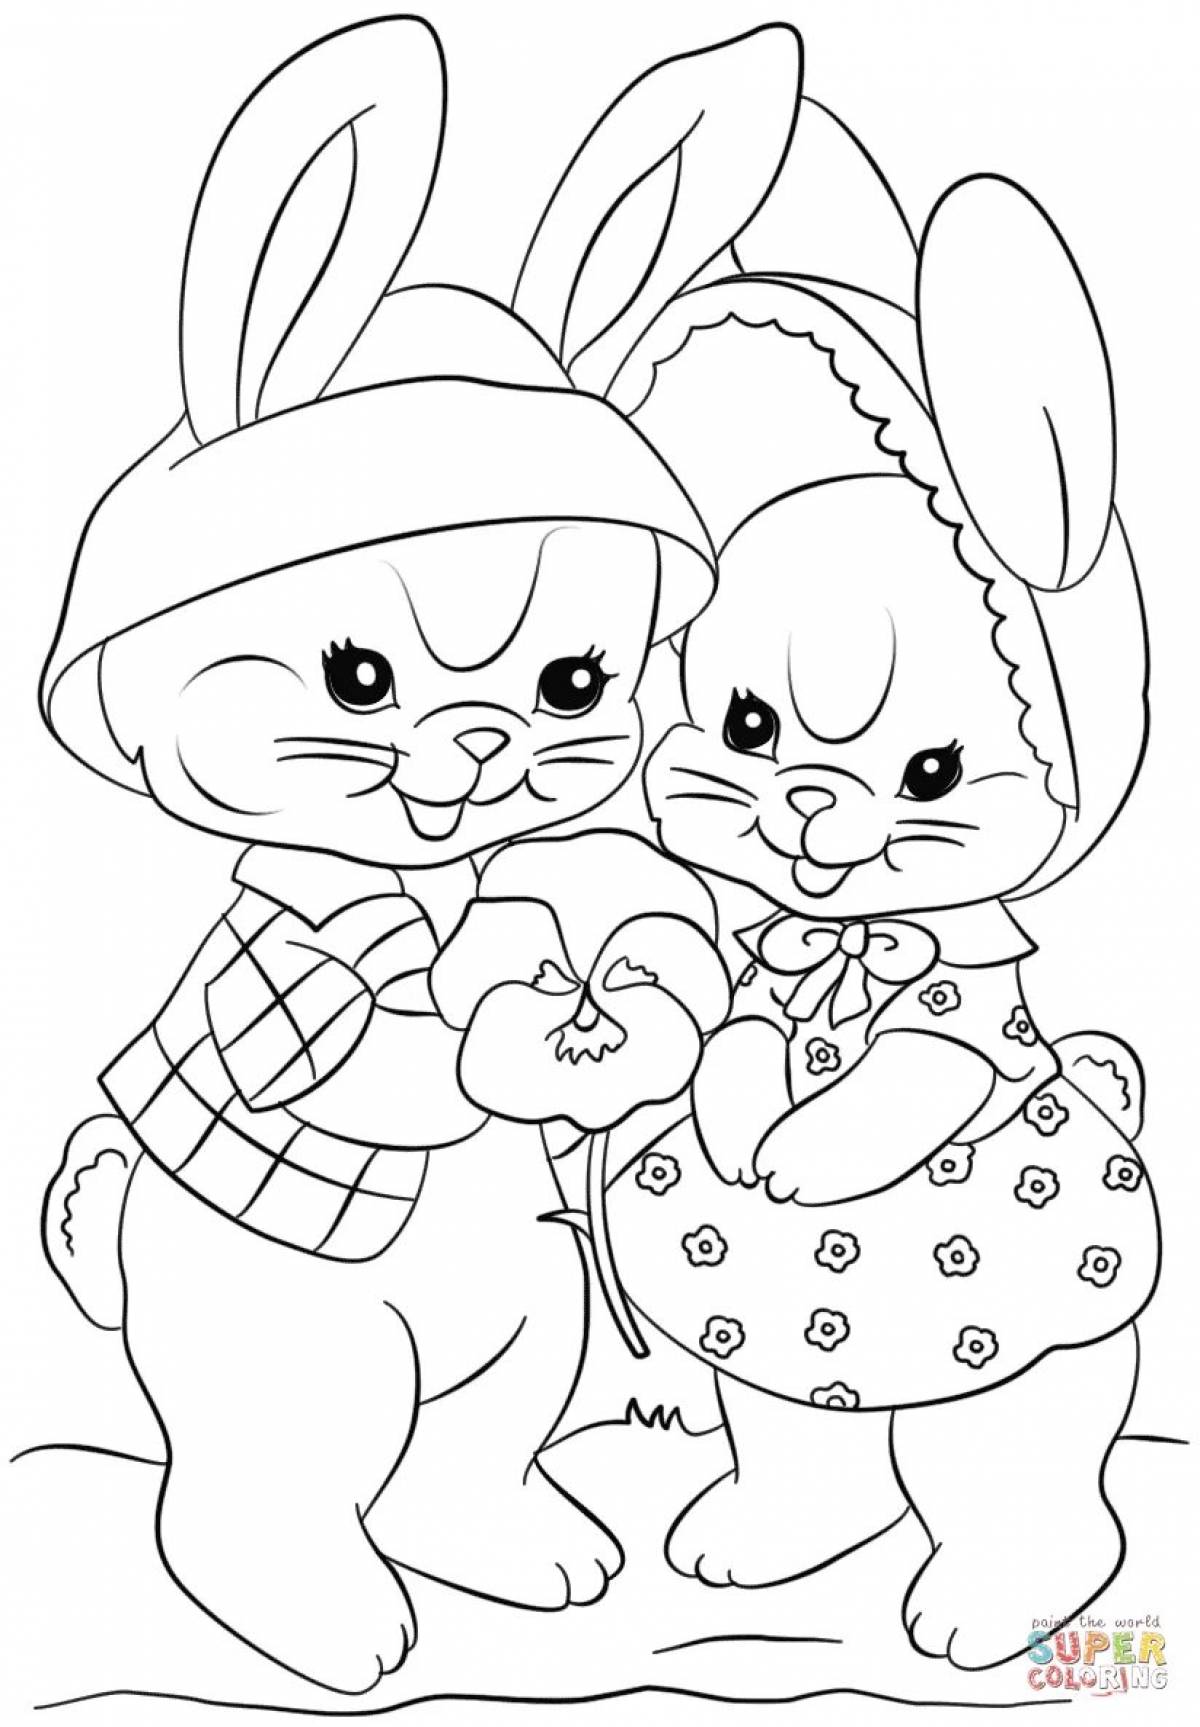 Glitter rabbit and cat coloring page